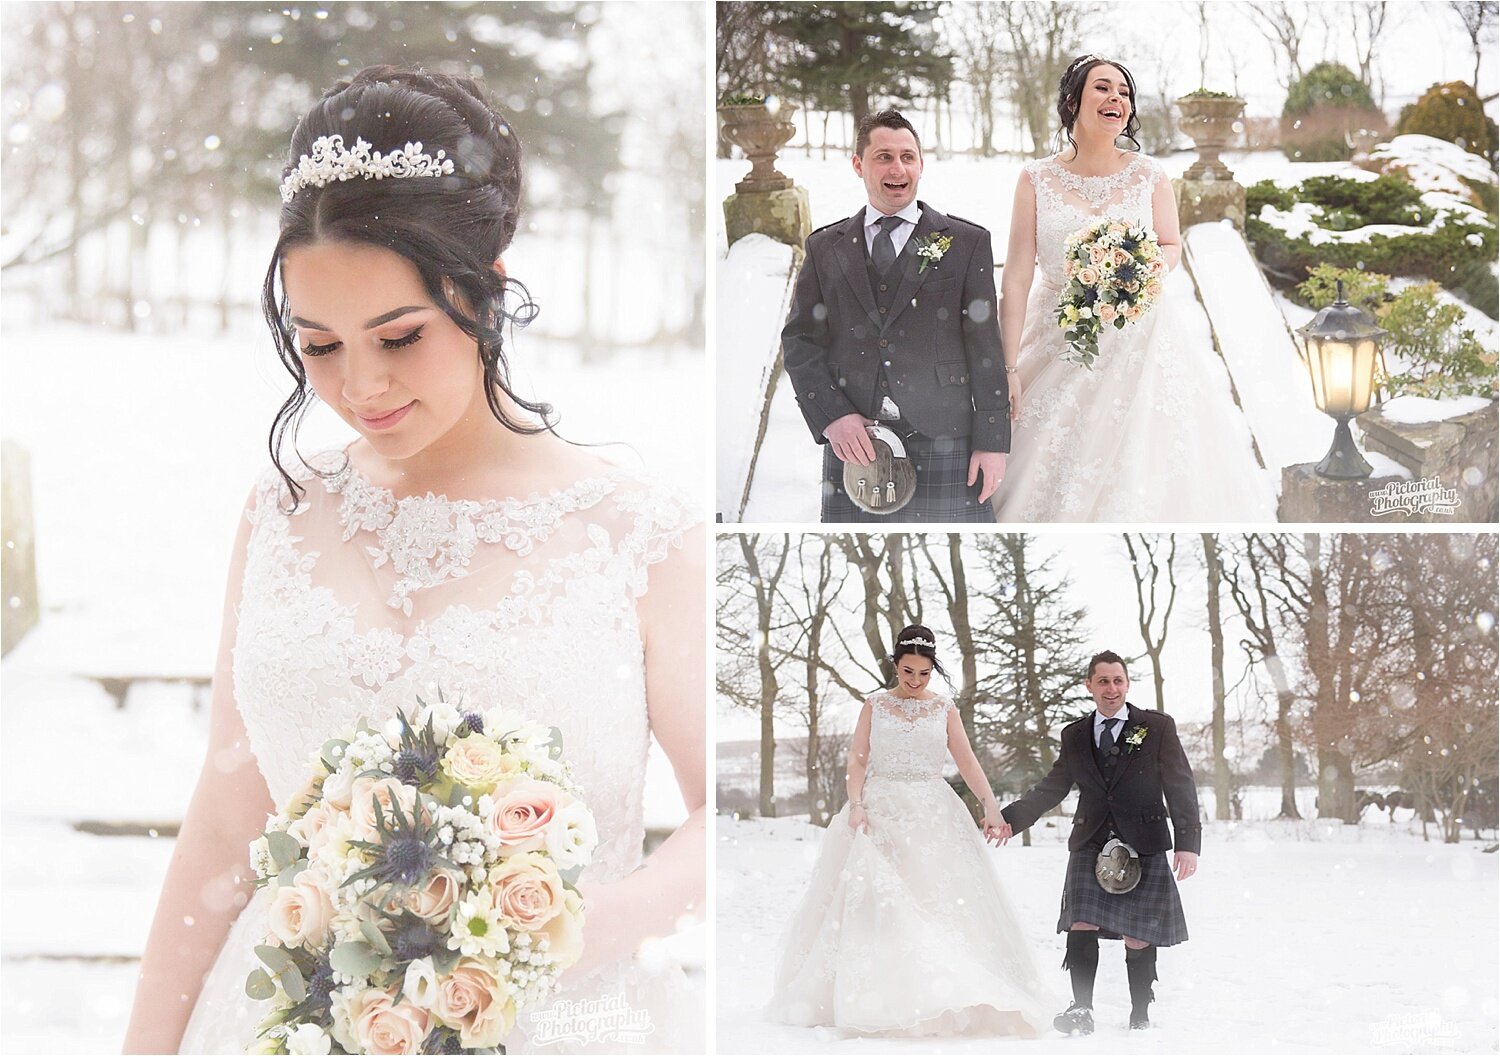 Wedding in the snow at Marshall Meadow Manor House, Berwick upon Tweed (Copy)